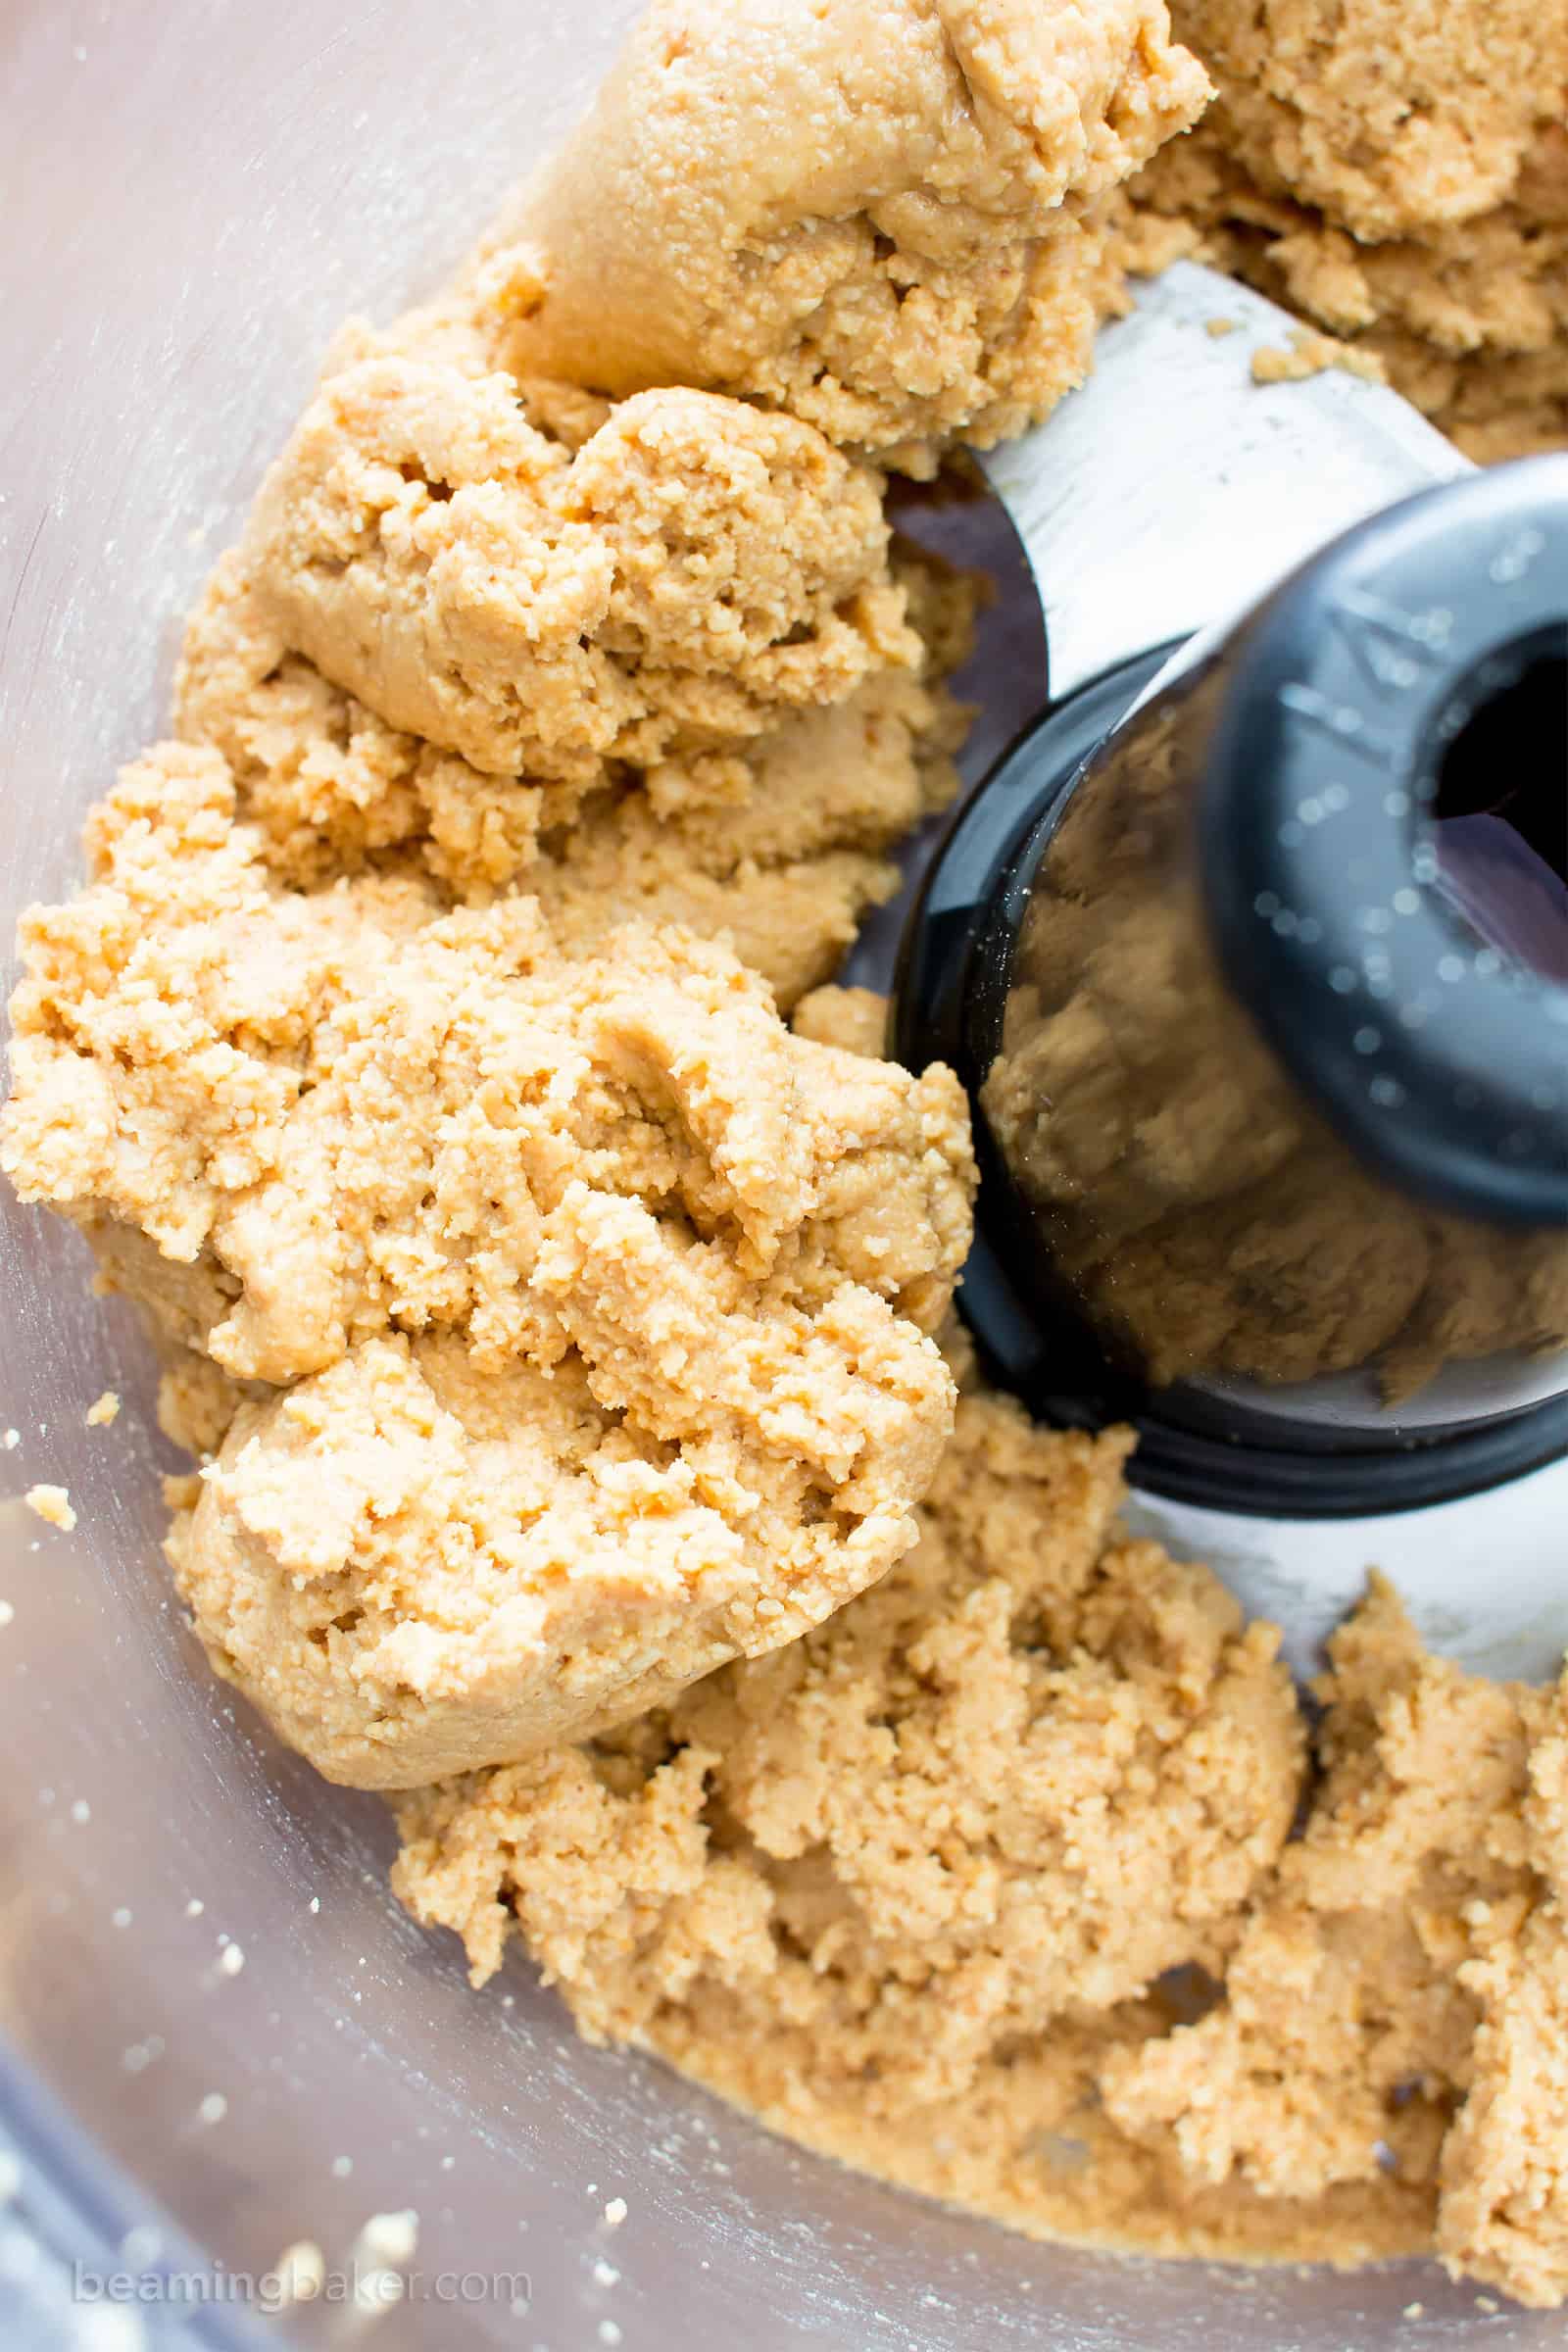 How to Make Homemade Peanut Butter: a step-by-step tutorial and video guide on how to make smooth, creamy homemade peanut butter. #Vegan #GlutenFree #DairyFree #DIY #Homemade | Recipe on BeamingBaker.com